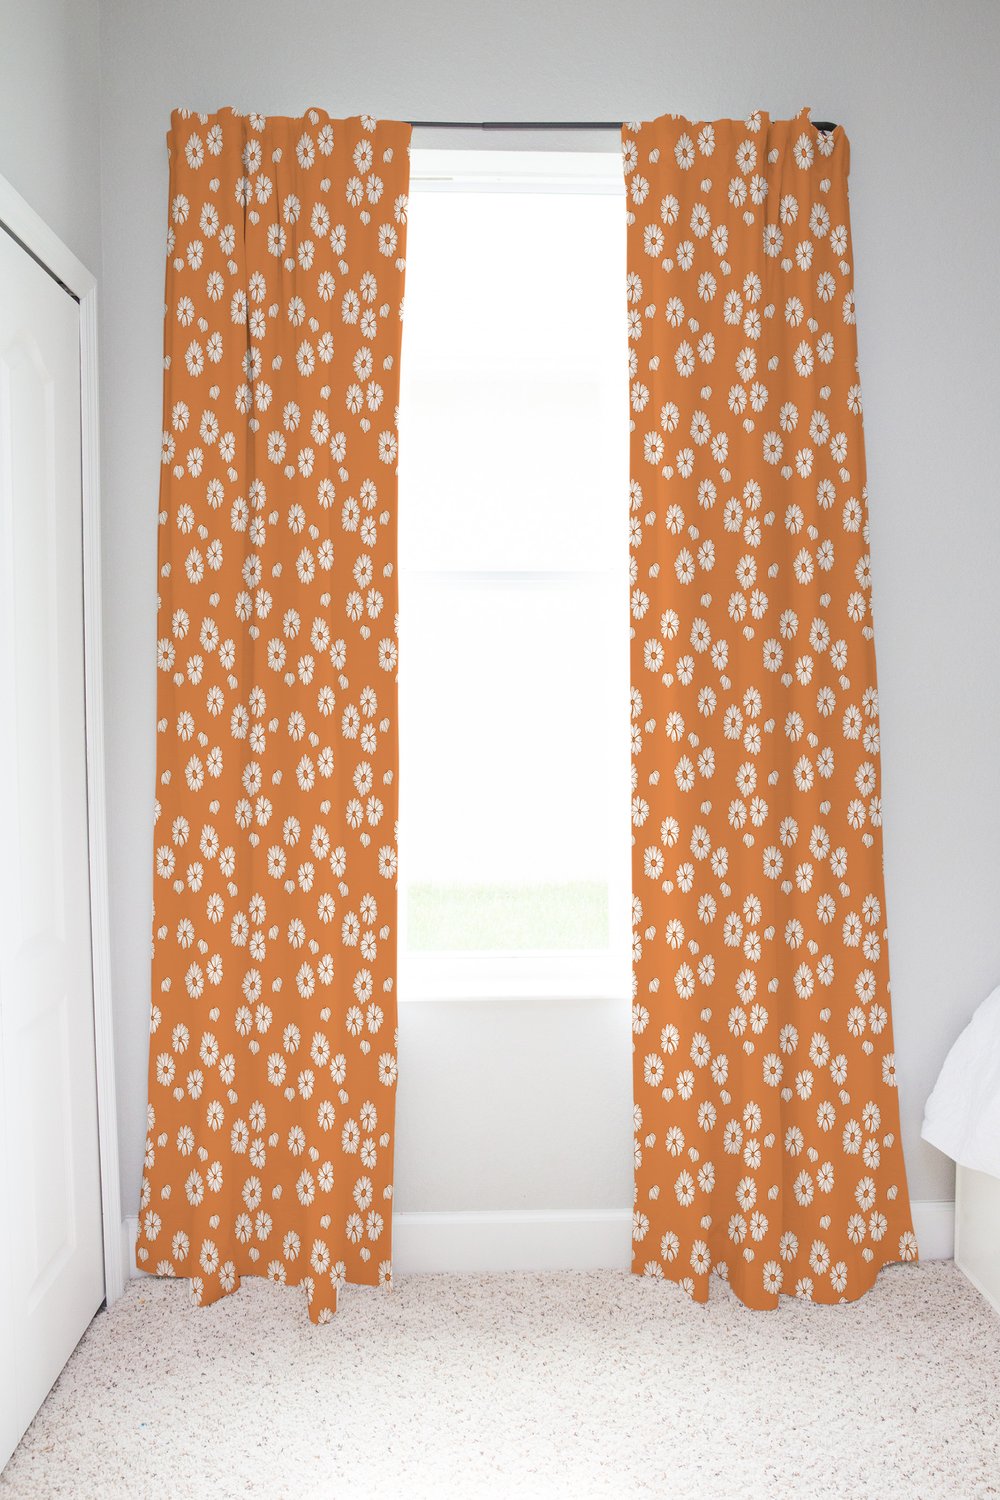 retro 1970s patterned curtains for nursery